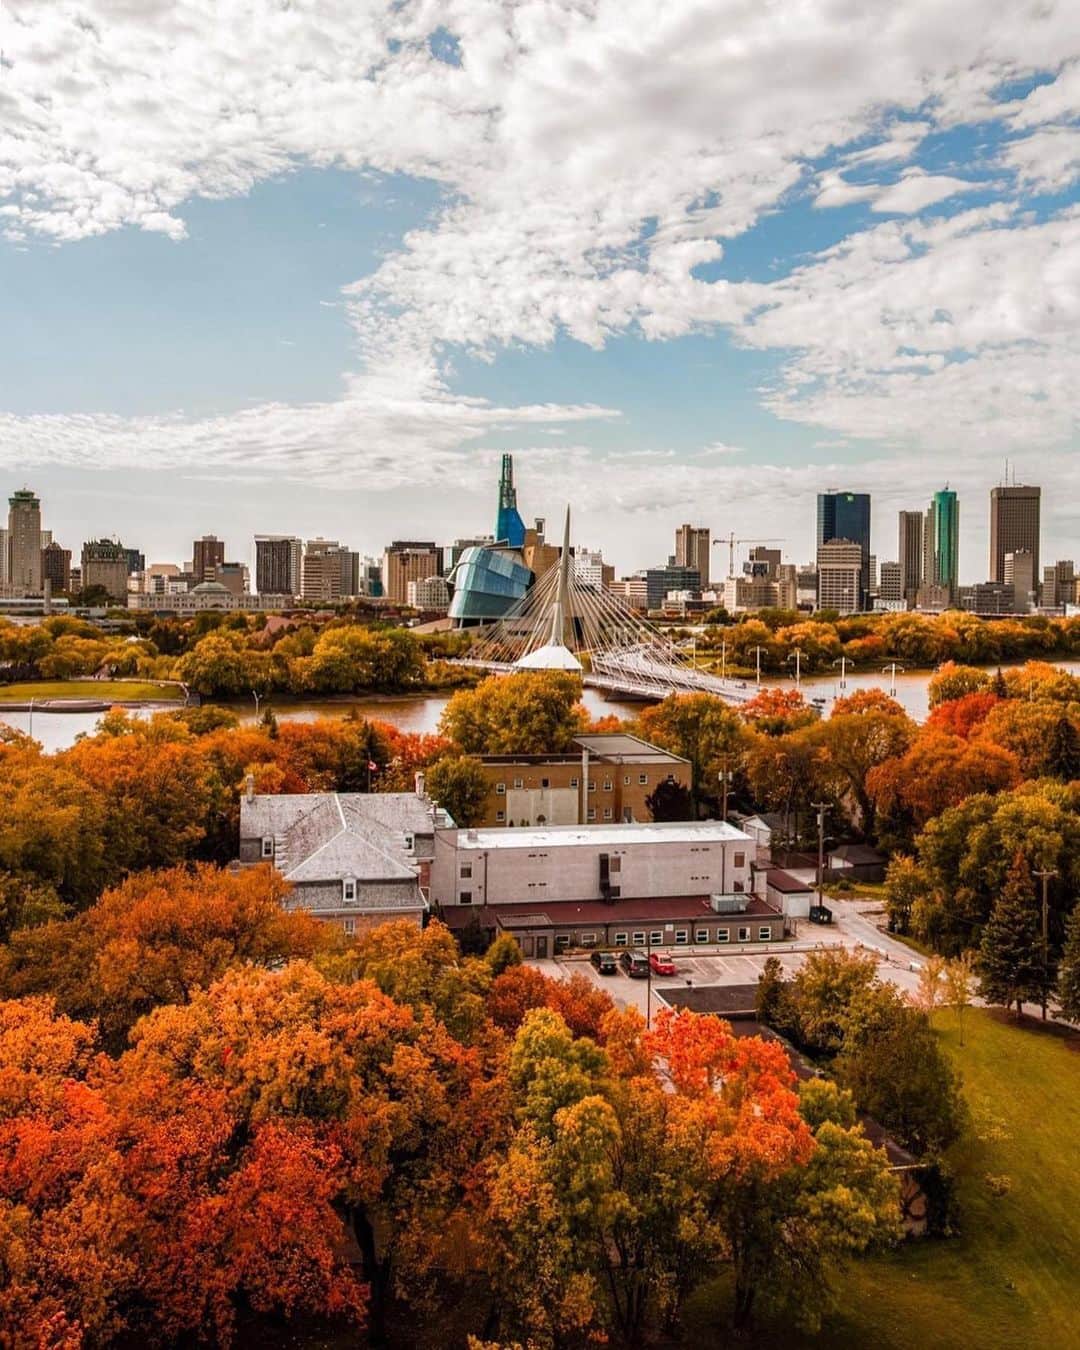 Explore Canadaさんのインスタグラム写真 - (Explore CanadaInstagram)「Today's #CanadaSpotlight is on @tourismwinnipeg!⁠⠀ ⁠⠀ Winnipeg is the capital of Manitoba, and sits at the junction of the Assinboine and Red Rivers. This is where the heart of the city gets its name from - The Forks! If you’re local to Winnipeg, here are some ways you can explore your city this summer:⁠⠀ ⁠⠀ ❤️ Hike or cycle through aspen forests at FortWhyte Alive (@fortwhytealive) - keep an eye out for wildlife, including over 160 species of birds and North America’s largest urban bison herd.⁠⠀ 💚 Explore gallery exhibits, including the world’s largest collection of contemporary Inuit Art at the Winnipeg Art Gallery (@wag_ca).⁠⠀ 💛 Take in the colours and cultures of the city with a self-guided mural tour.⁠⠀ 🧡 Embark on a culinary adventure and tour some of the city’s 50+ delicious food trucks.⁠⠀ 💜 Sit back and relax at Thermëa by Nordik Spa-Nature (@thermeawinnipeg), Winnipeg’s Scandinavian outdoor spa.⁠⠀ ⁠⠀ Head on over to @tourismwinnipeg's profile for more things to do in Winnipeg, amazing photos, local updates and more!⁠⠀ ⁠⠀ #ExploreCanadaFromHome #ForGlowingHearts⁠⠀ ⁠⠀ 📷: ⁠⠀ ⁠⠀ 1. @jeff_vernaus⁠⠀ 2&3. @peggrammer⁠⠀ 4. @anthony_urso⁠⠀ 5. @gyk26⁠⠀ 6. @vince.constantine⁠⠀ 7. @didurdesigns⁠⠀ 8. @tourismwinnipeg  Nordik Group⁠⠀ ⁠⠀ 📍: @tourismwinnipeg⁠⠀ ⁠⠀ #OnlyInThePeg⁠⠀」7月25日 1時26分 - explorecanada